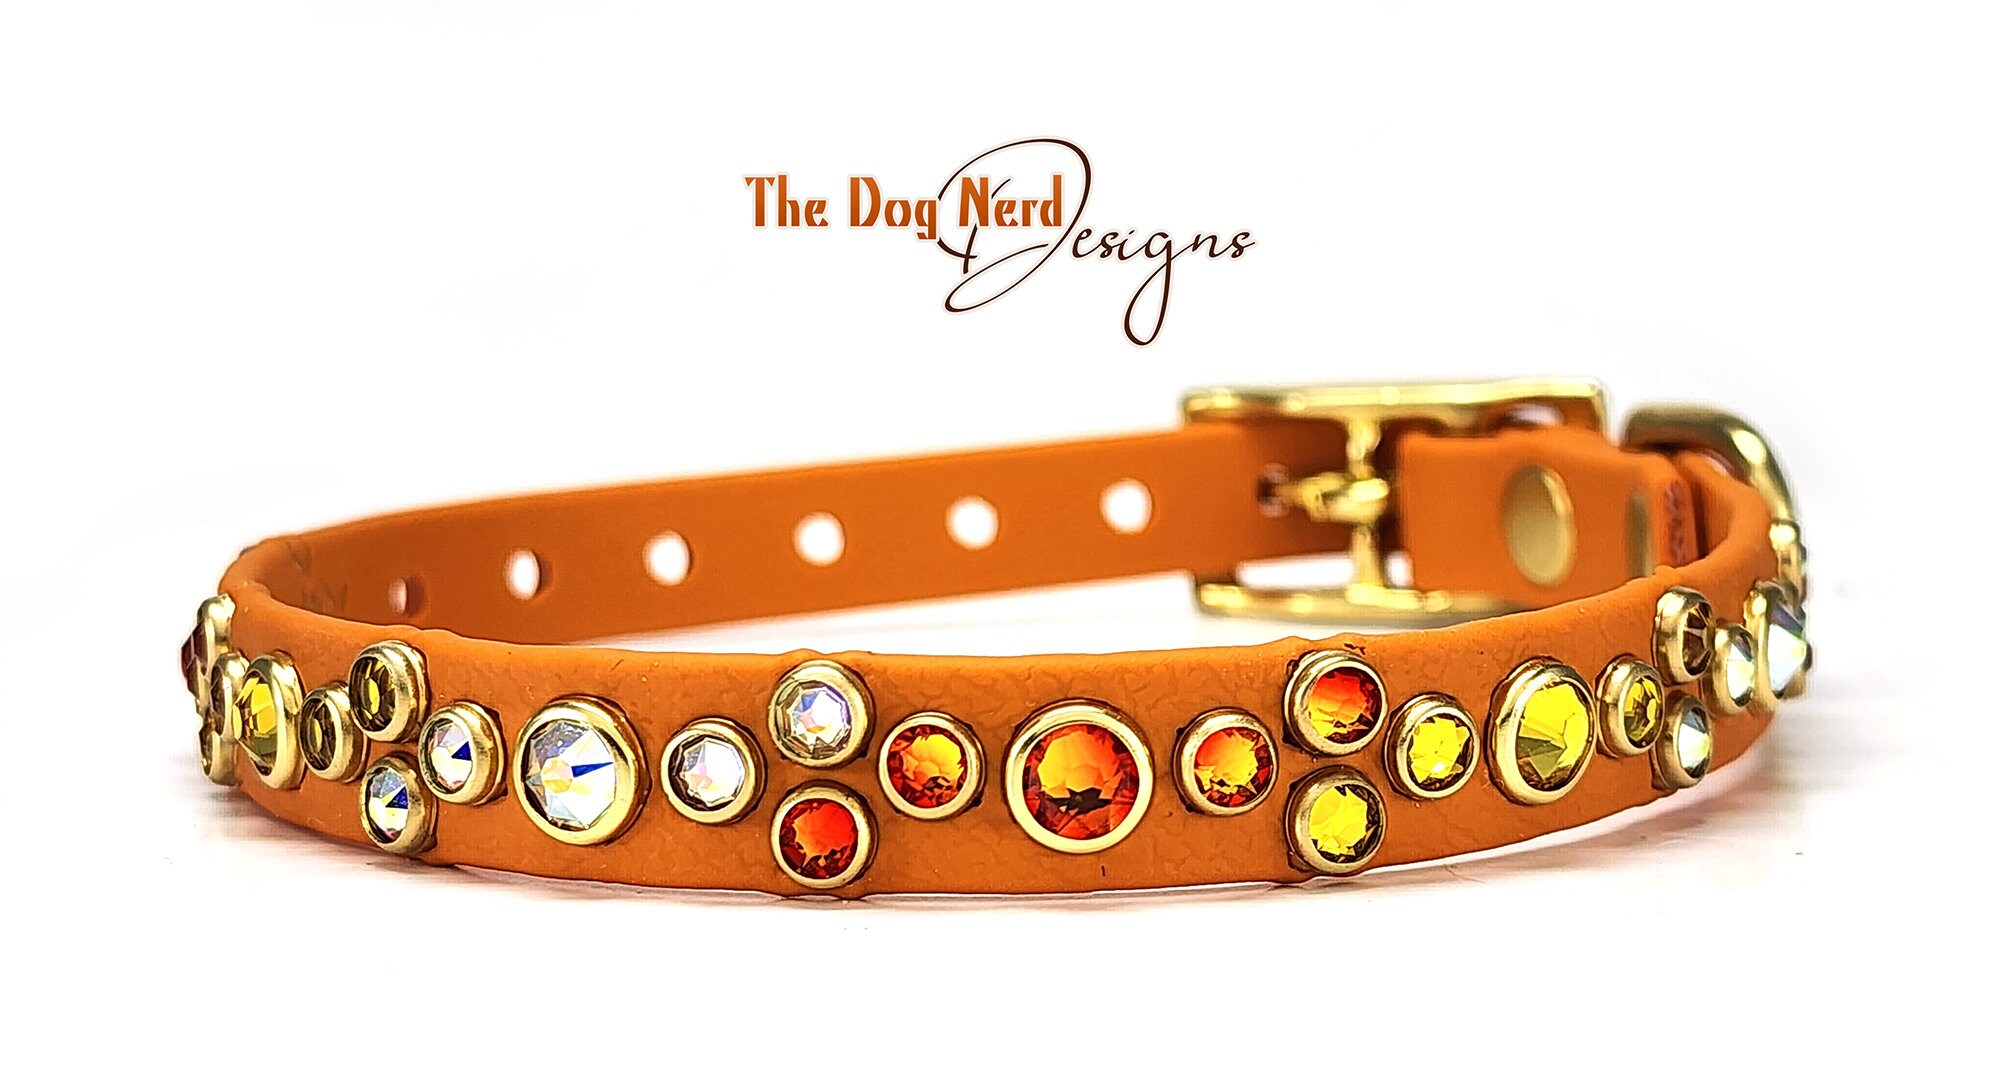 Luxury Personalized Dog Collars - 9 Cotton Voile Styles Available